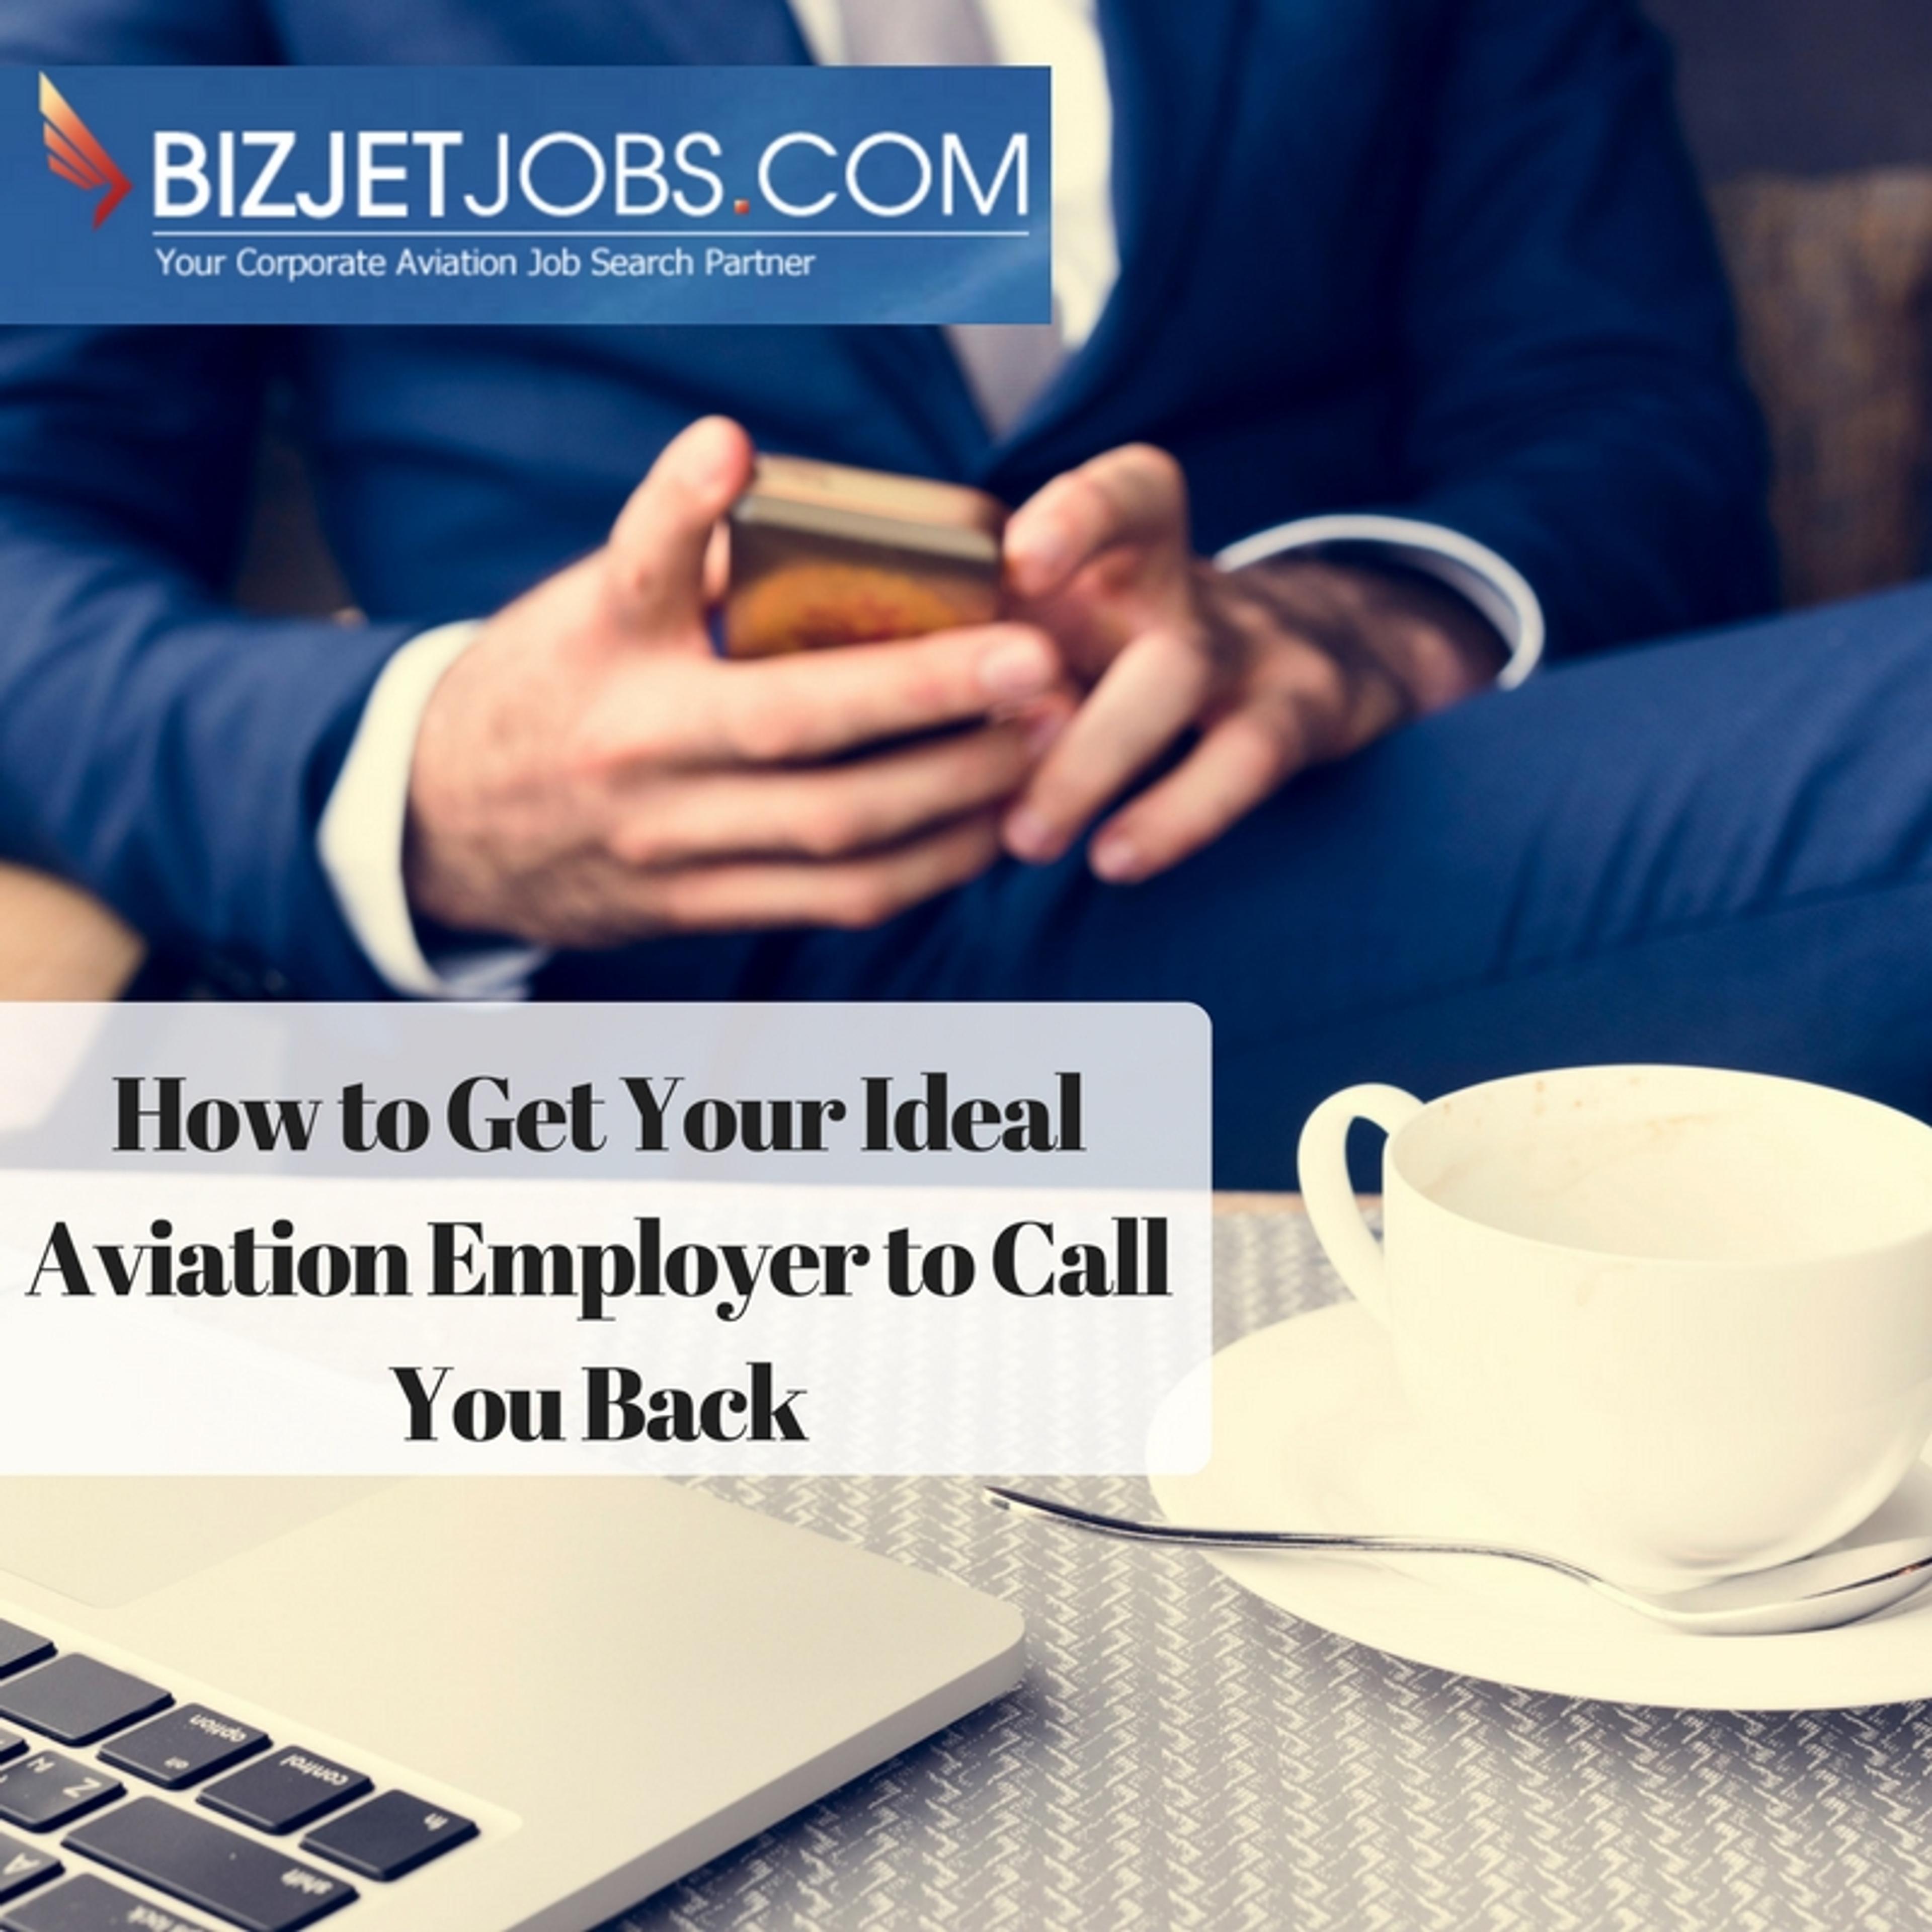 Corporate Pilots: Get Your Ideal Aviation Employer to Call You Back